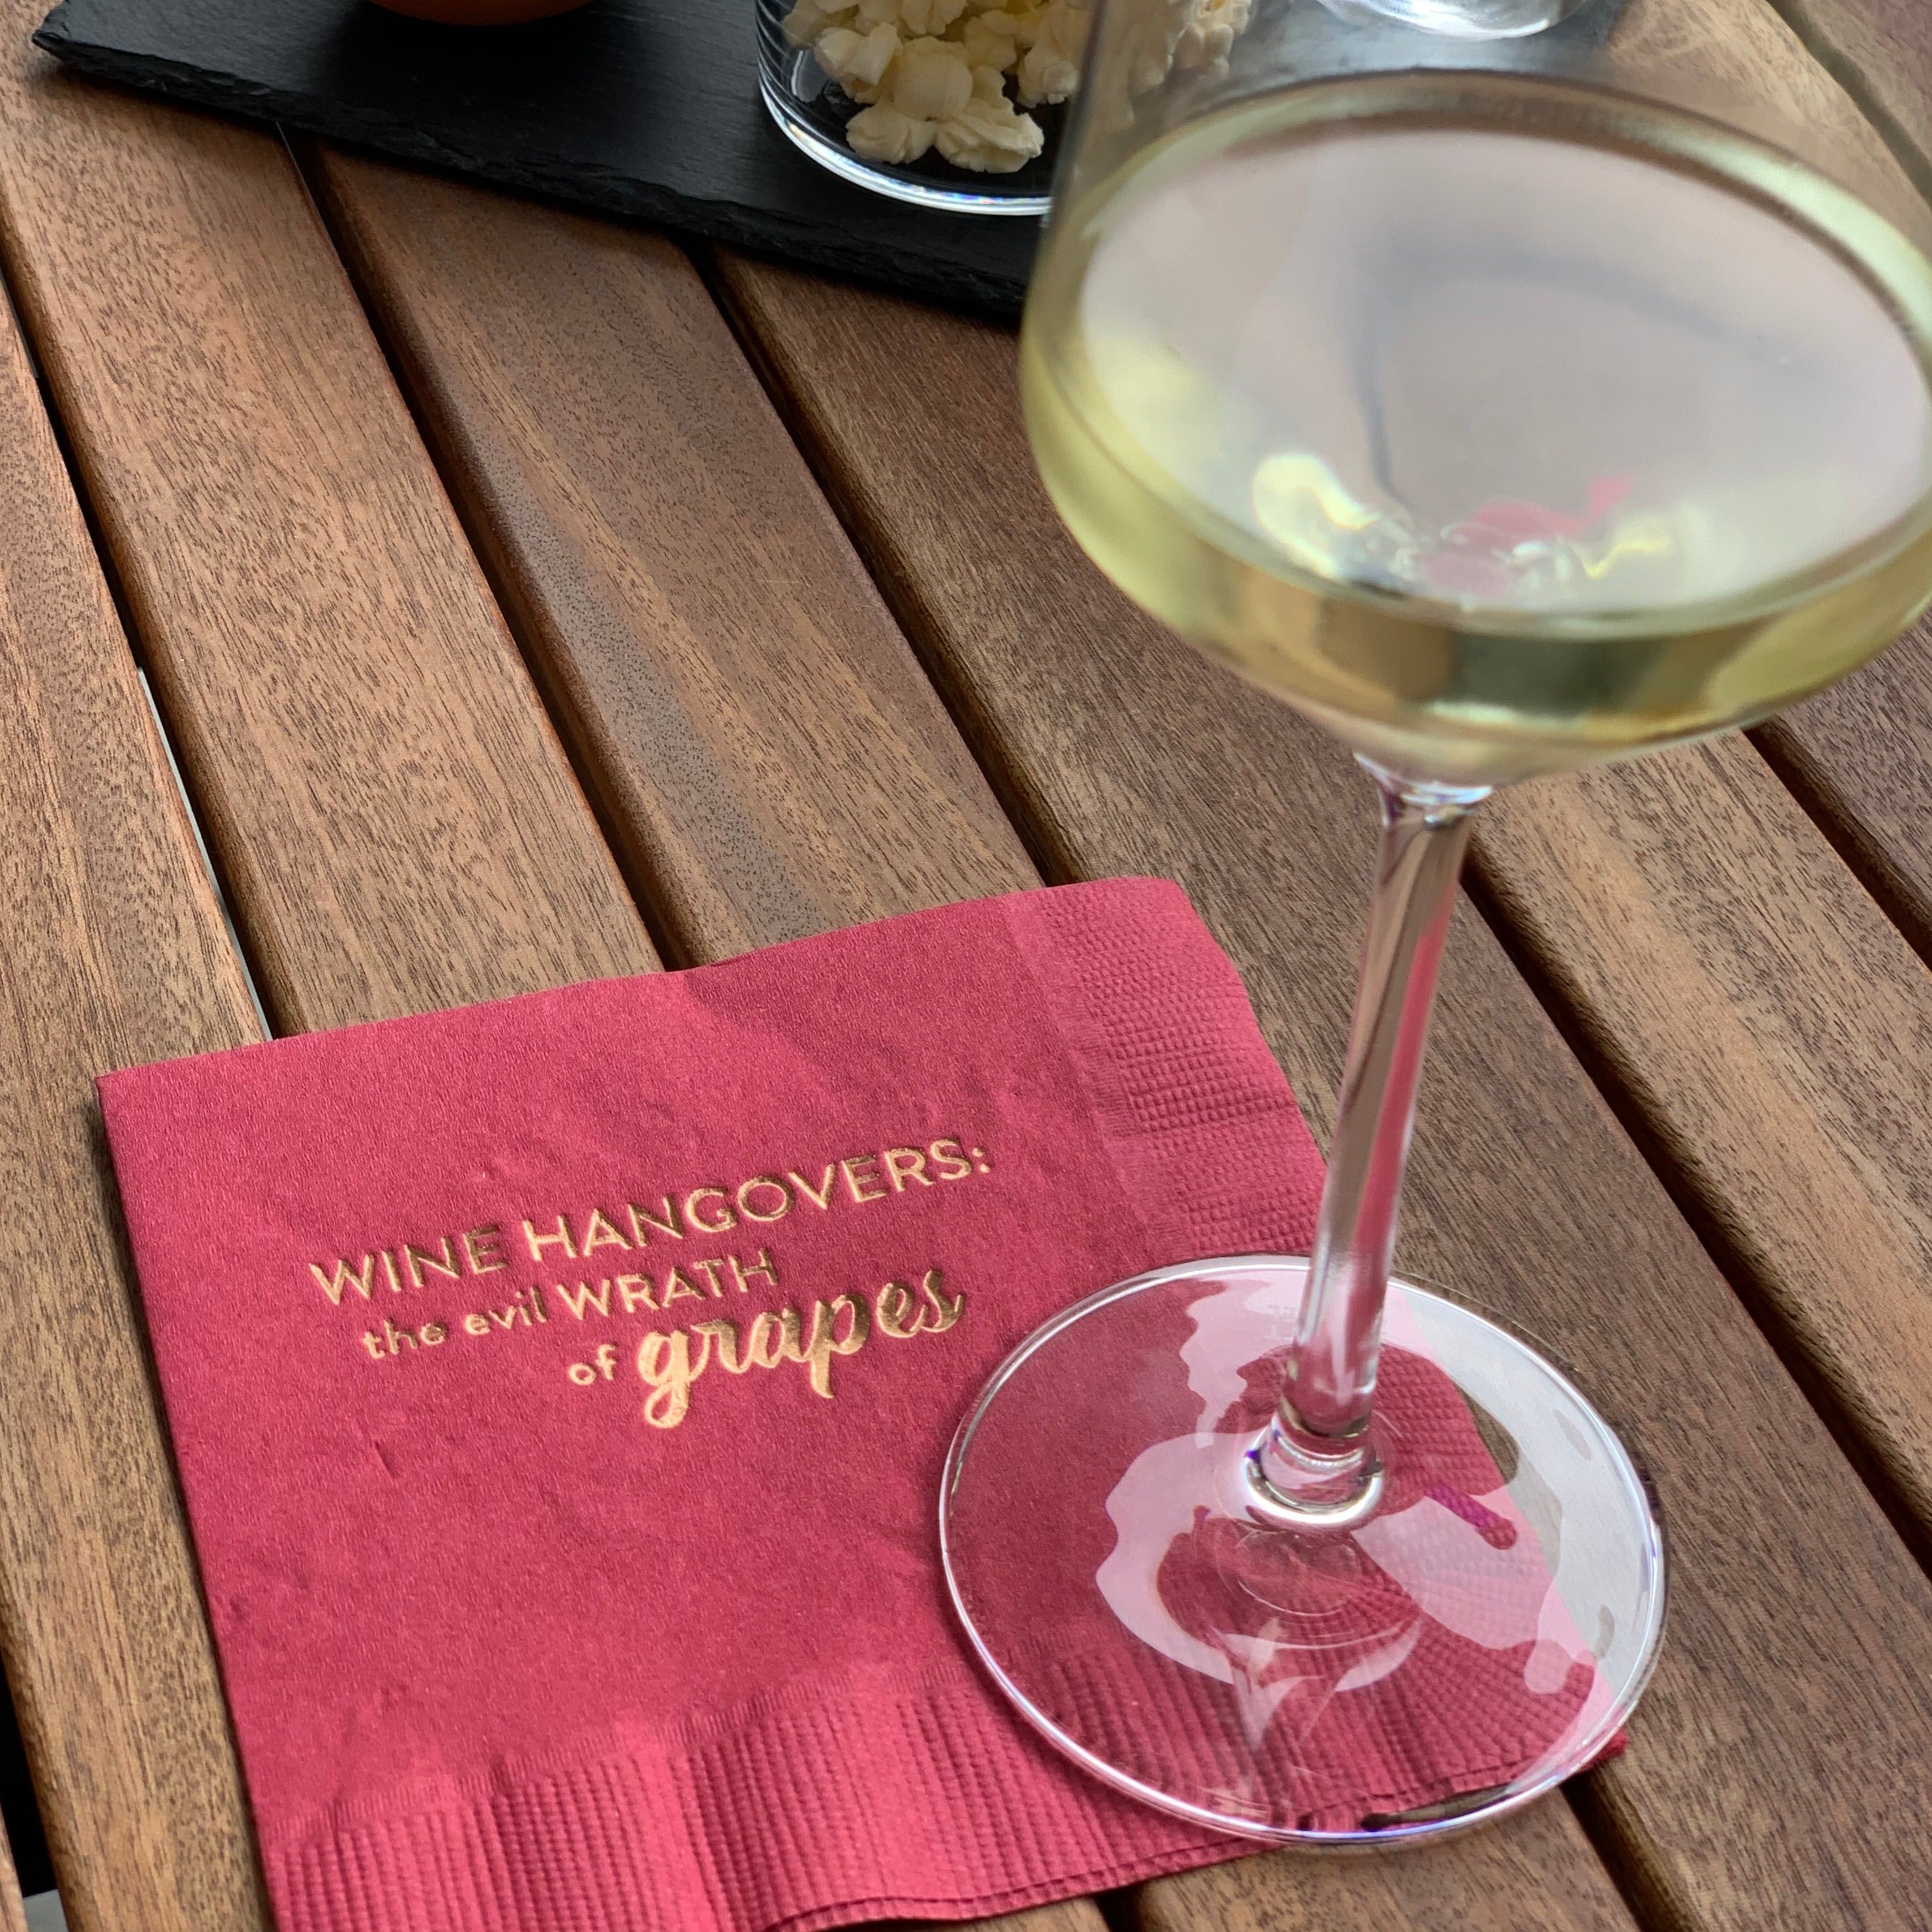 Wine hangovers... wrath of grapes - Cocktail Napkin